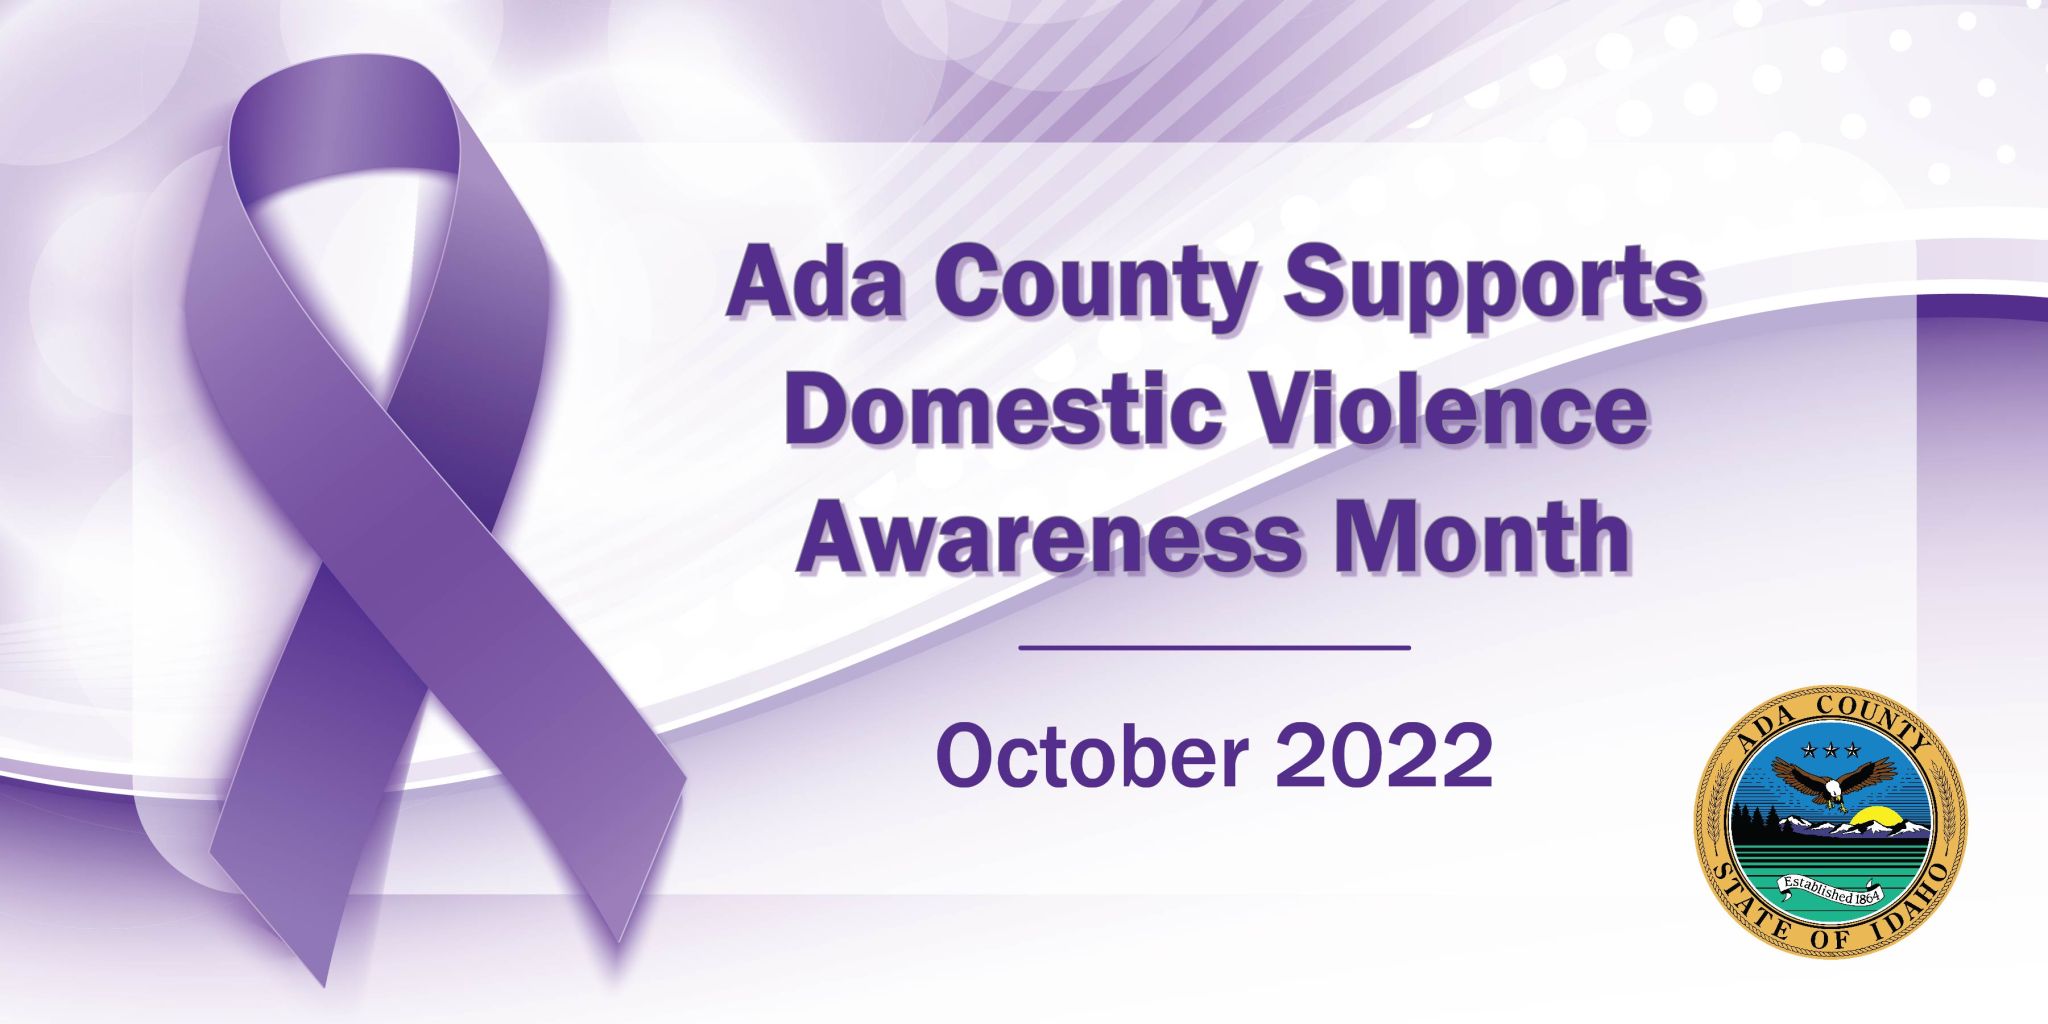 Ada County Supports Domestic Violence Awareness Month